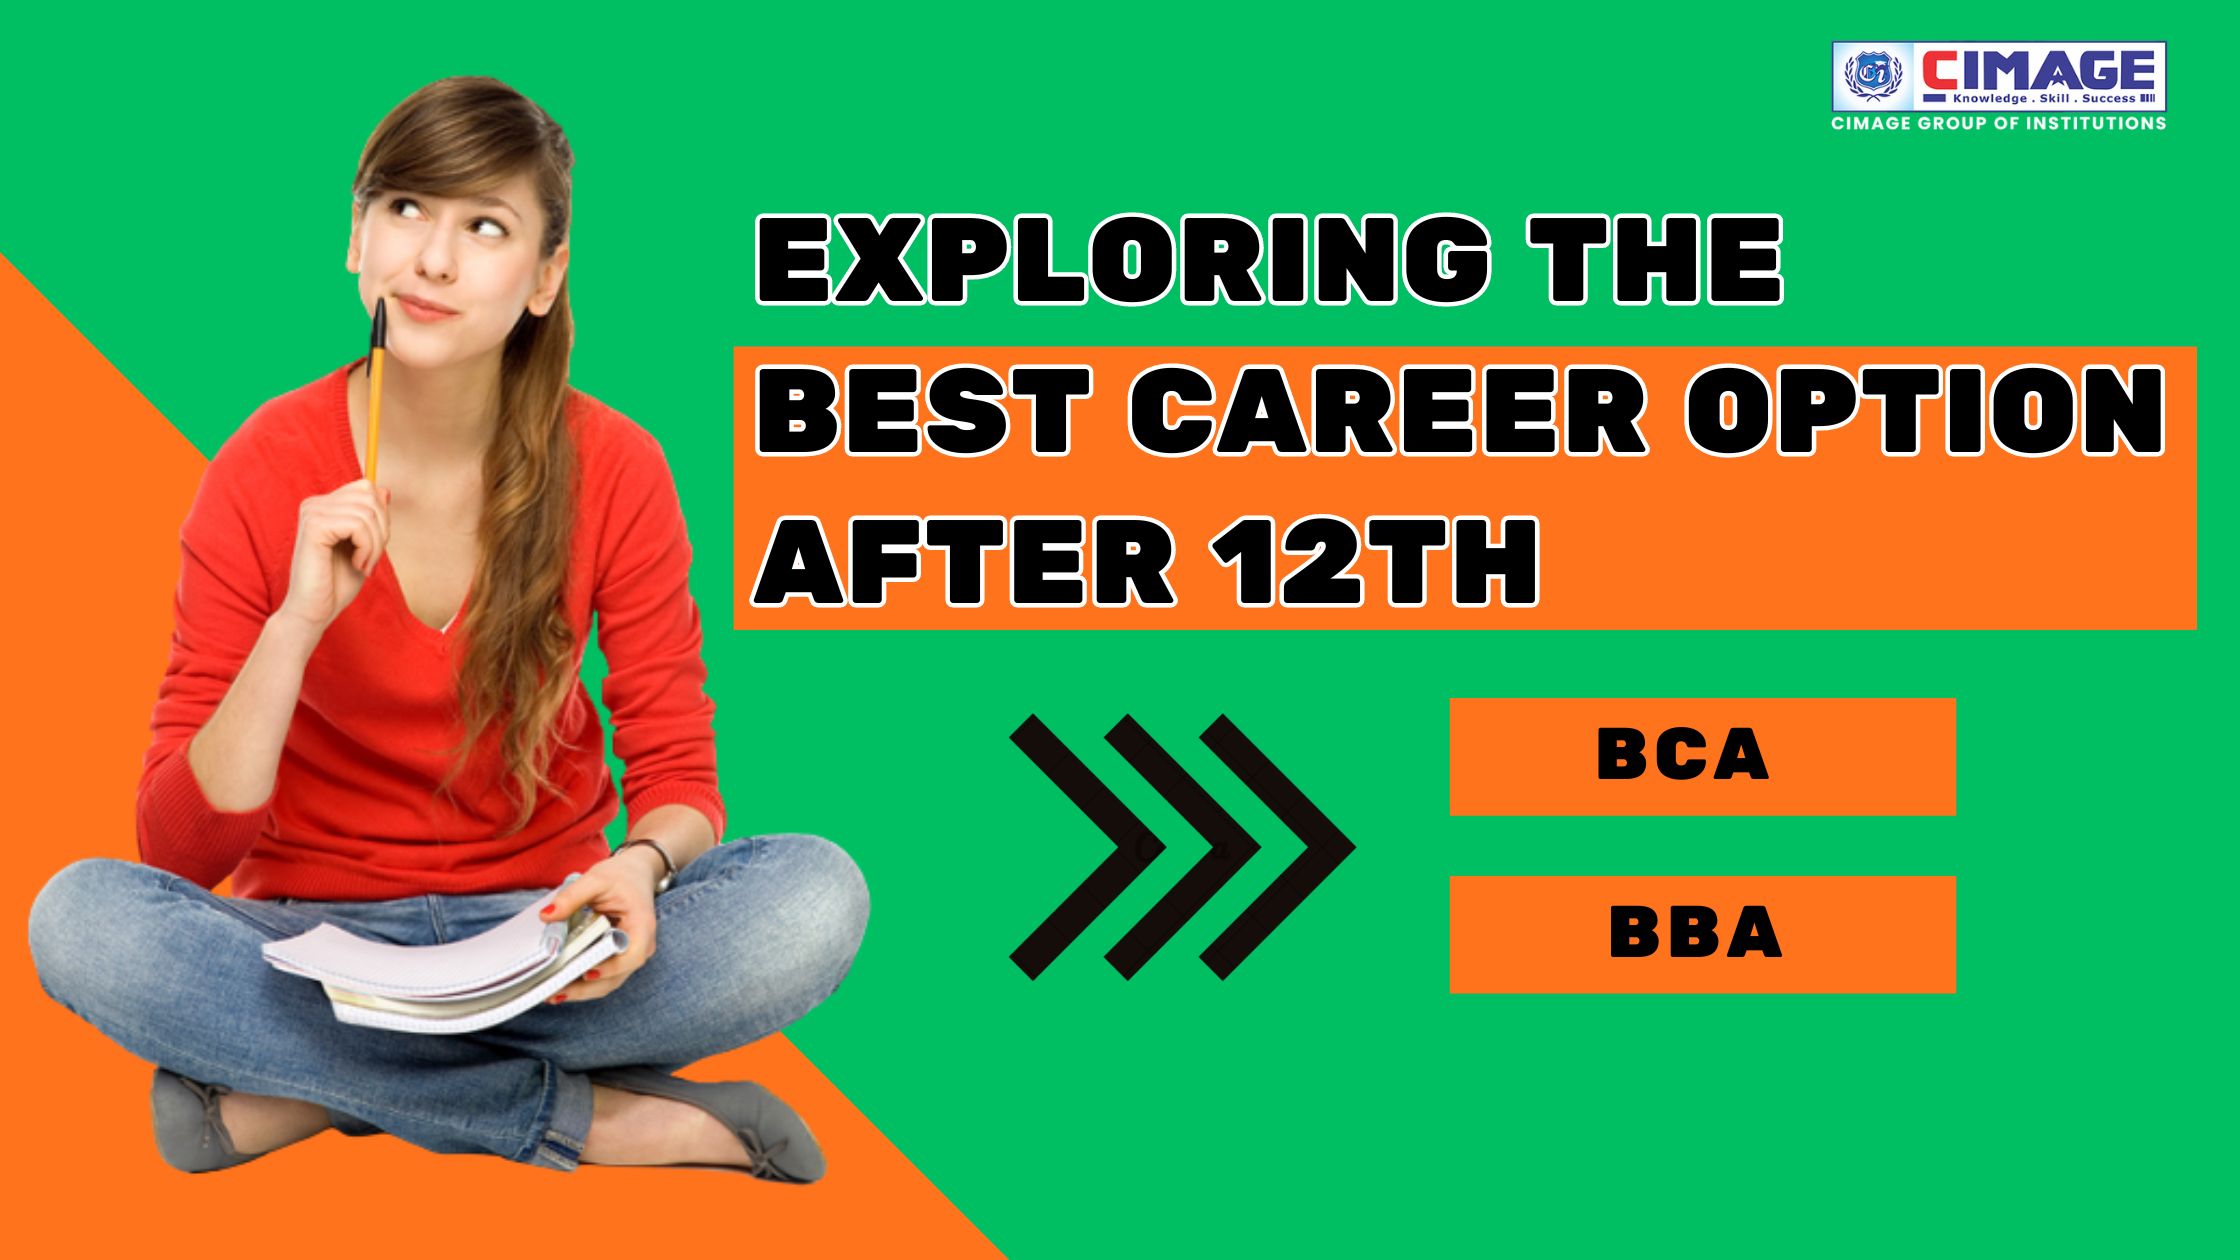 Exploring the Best Career Options After 12th: BCA and BBA